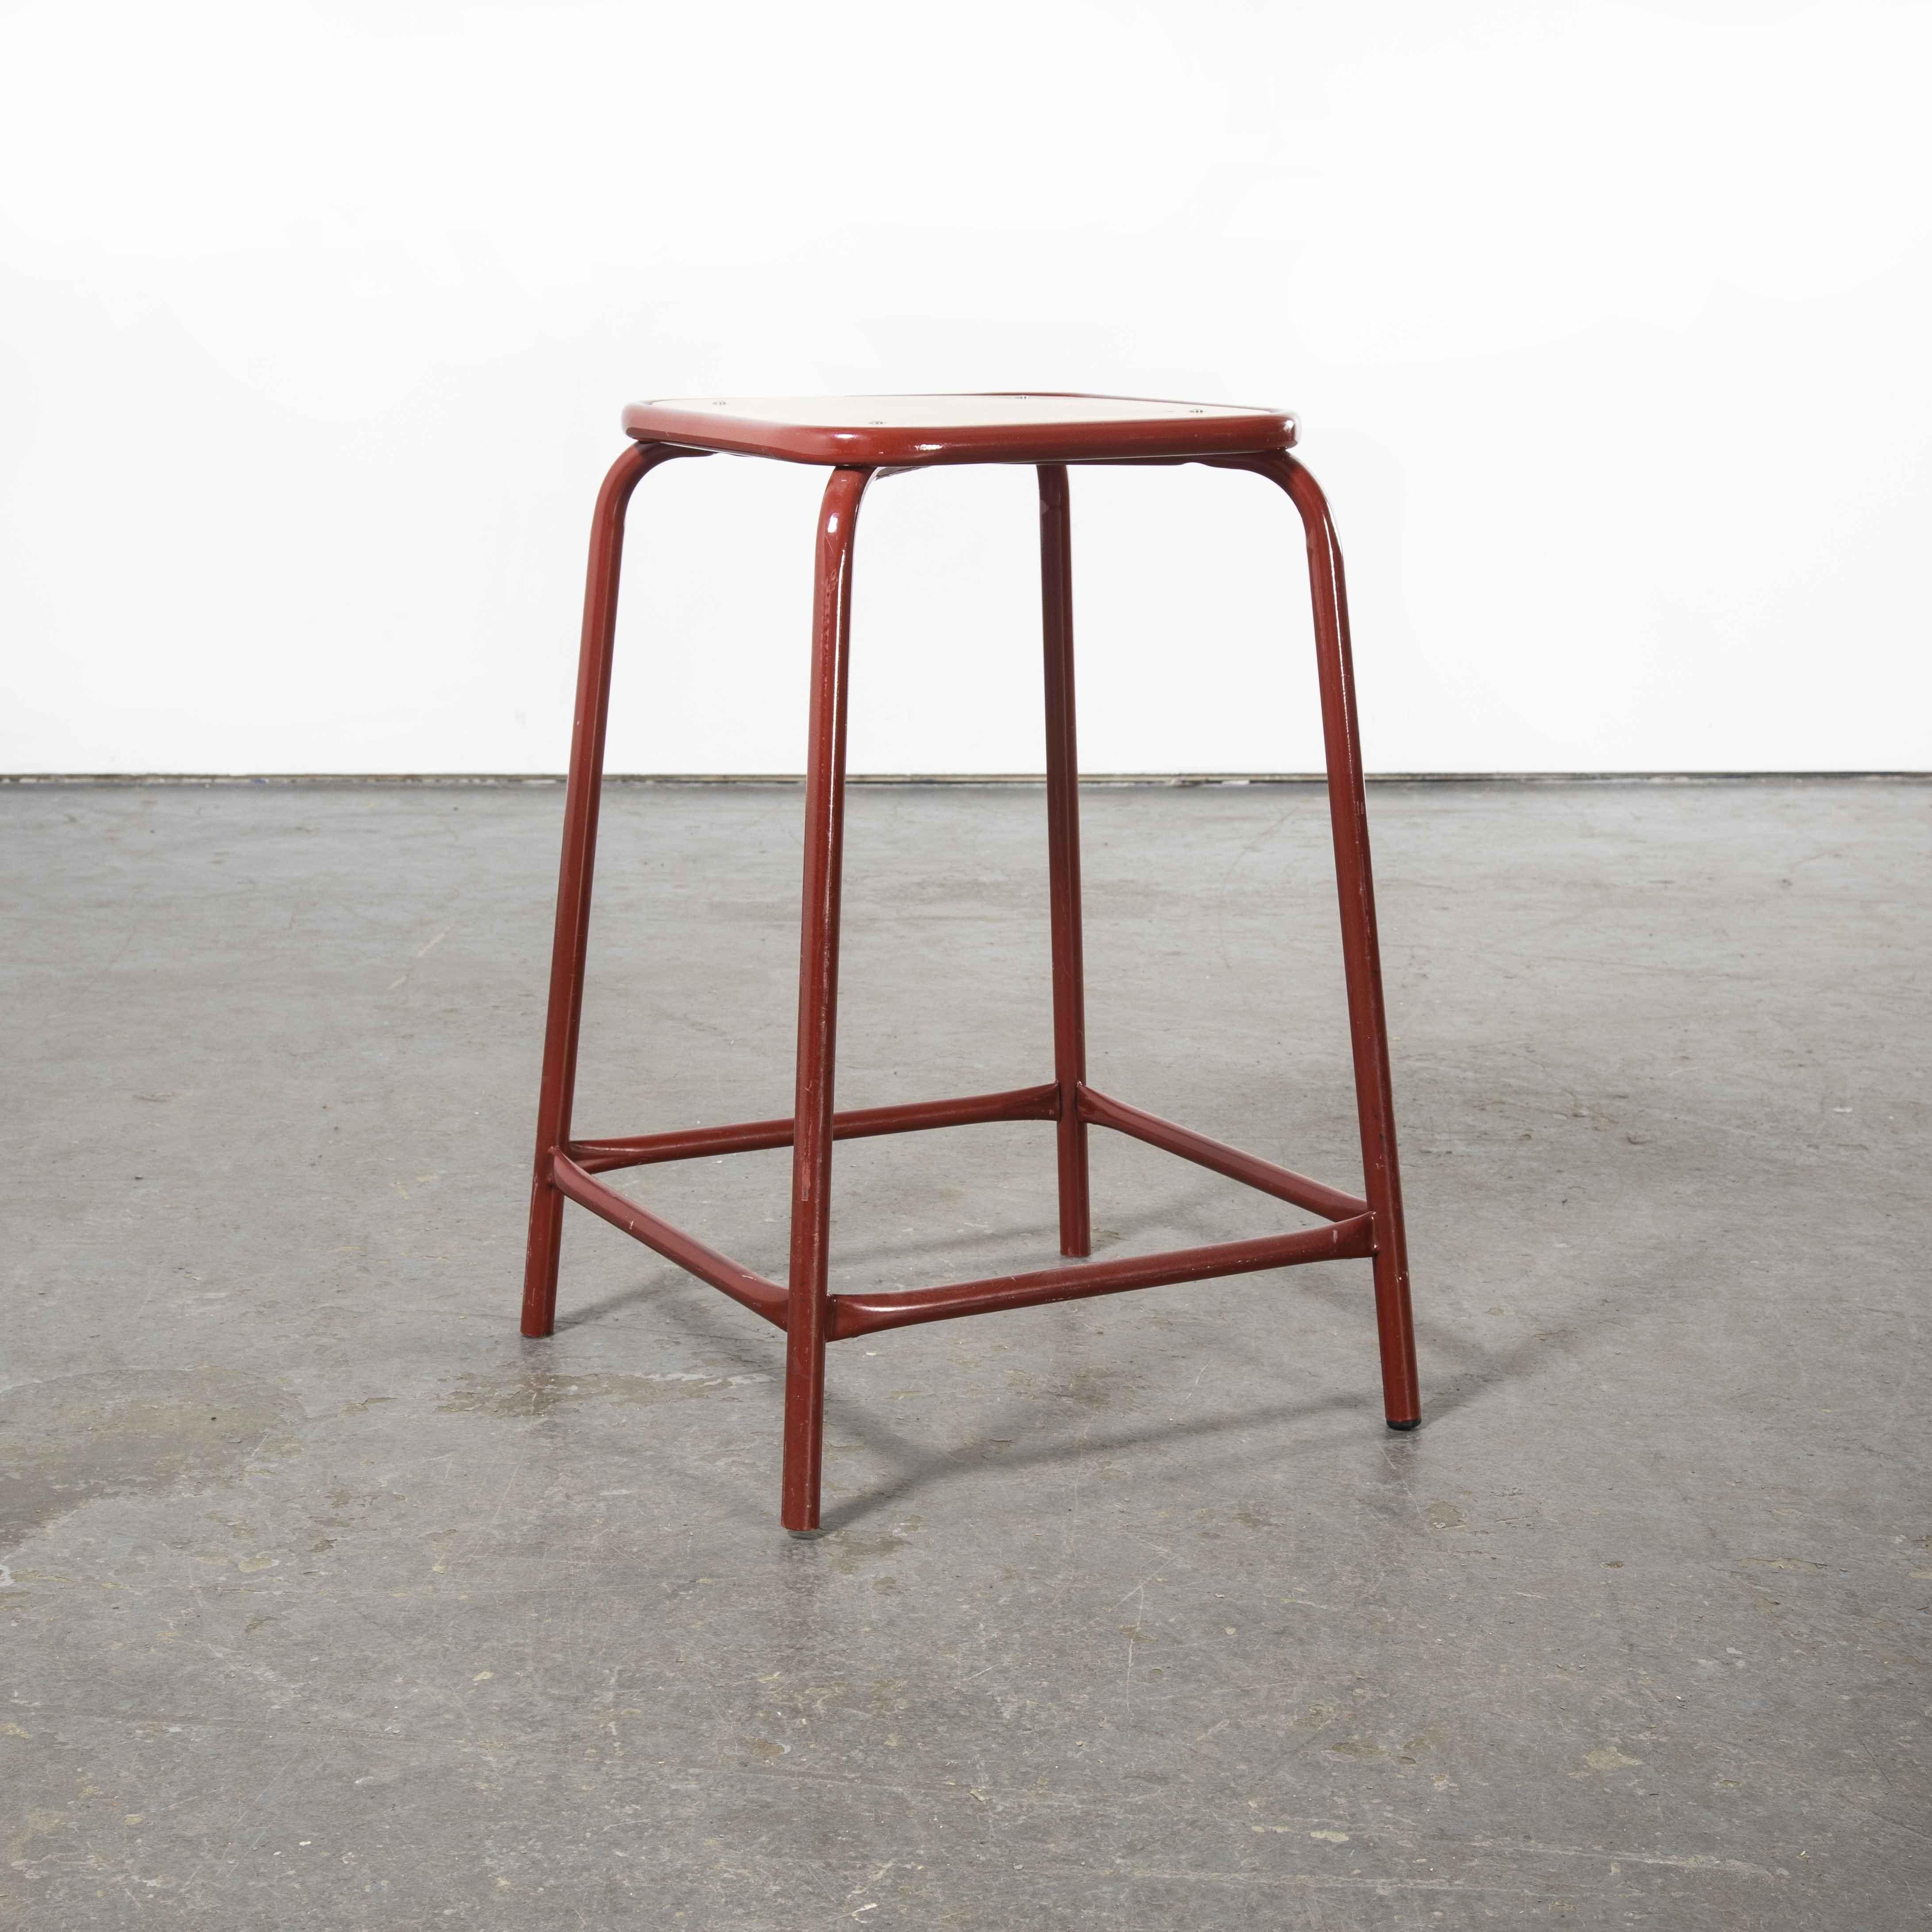 1970’s French dark red laboratory stools – various quantities available

1970’s French dark red laboratory stools – various quantities available. Good honest lab stools, heavy steel frames with solid heavy birch ply seats. We clean them and check